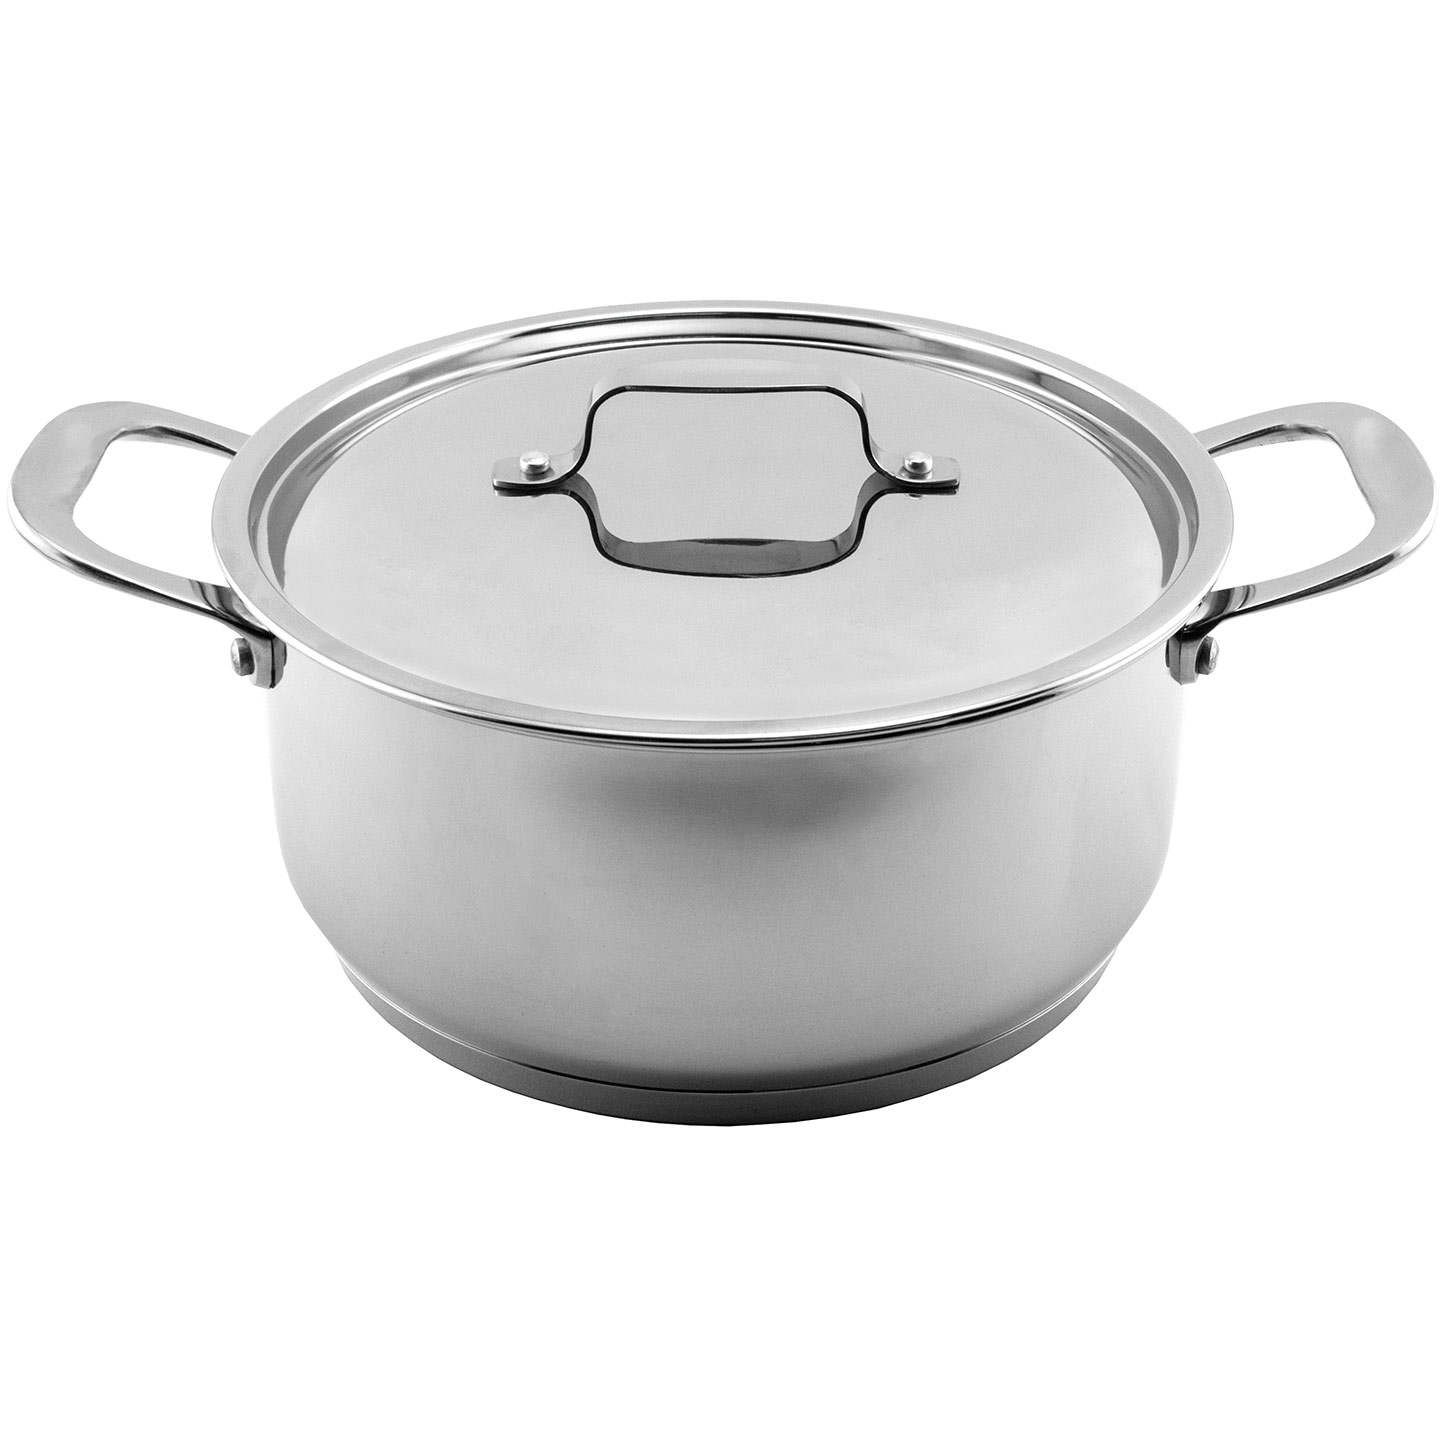 Empire Pro-ware - 5 Qt. Dutch Oven with Lid 